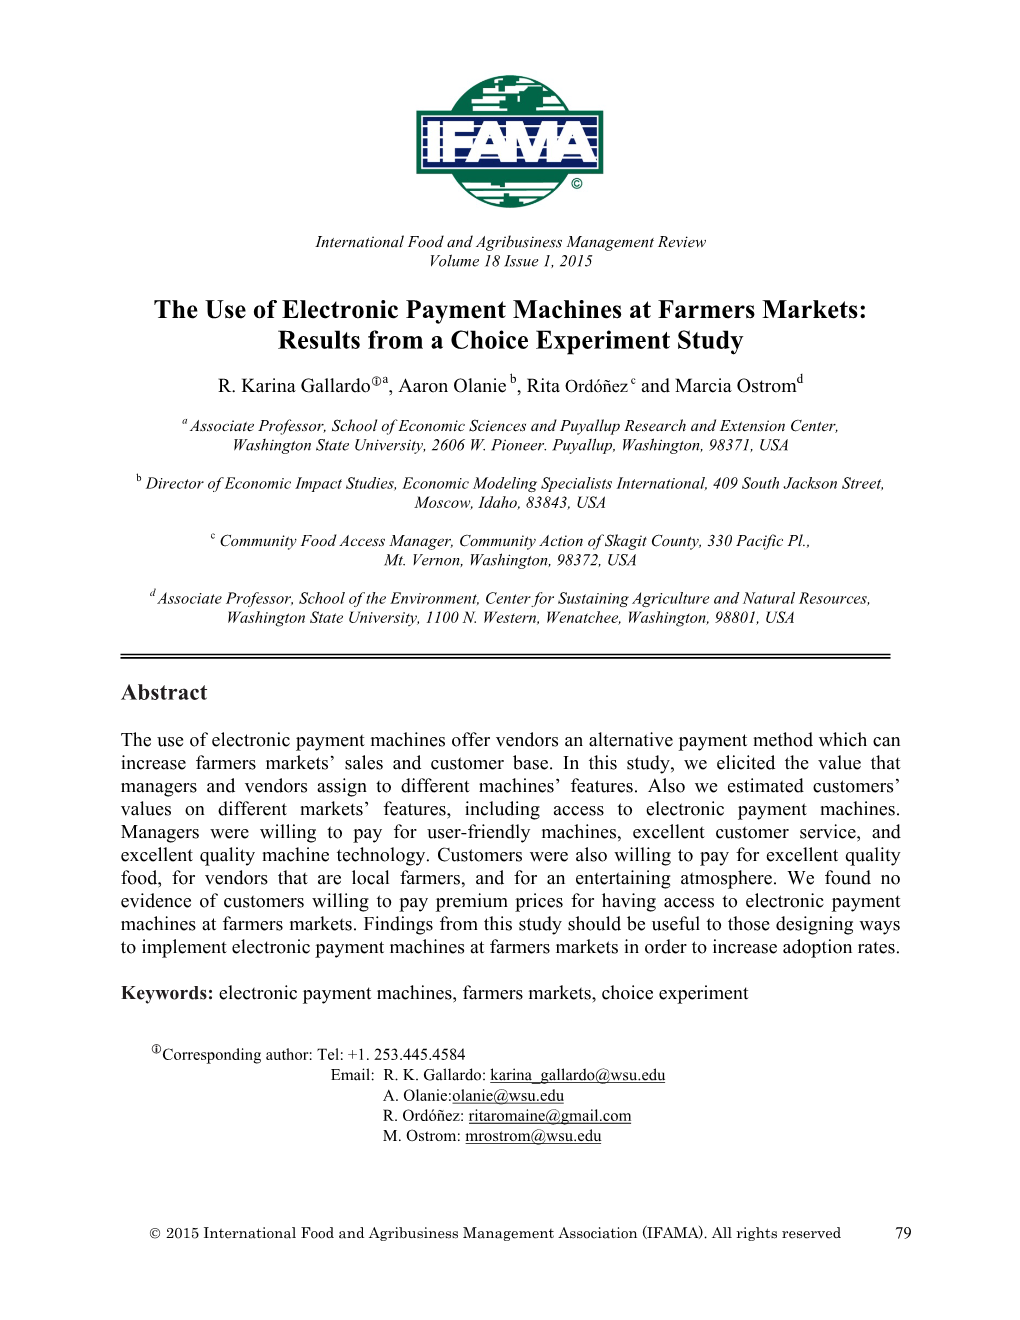 The Use of Electronic Payment Machines at Farmers Markets: Results from a Choice Experiment Study